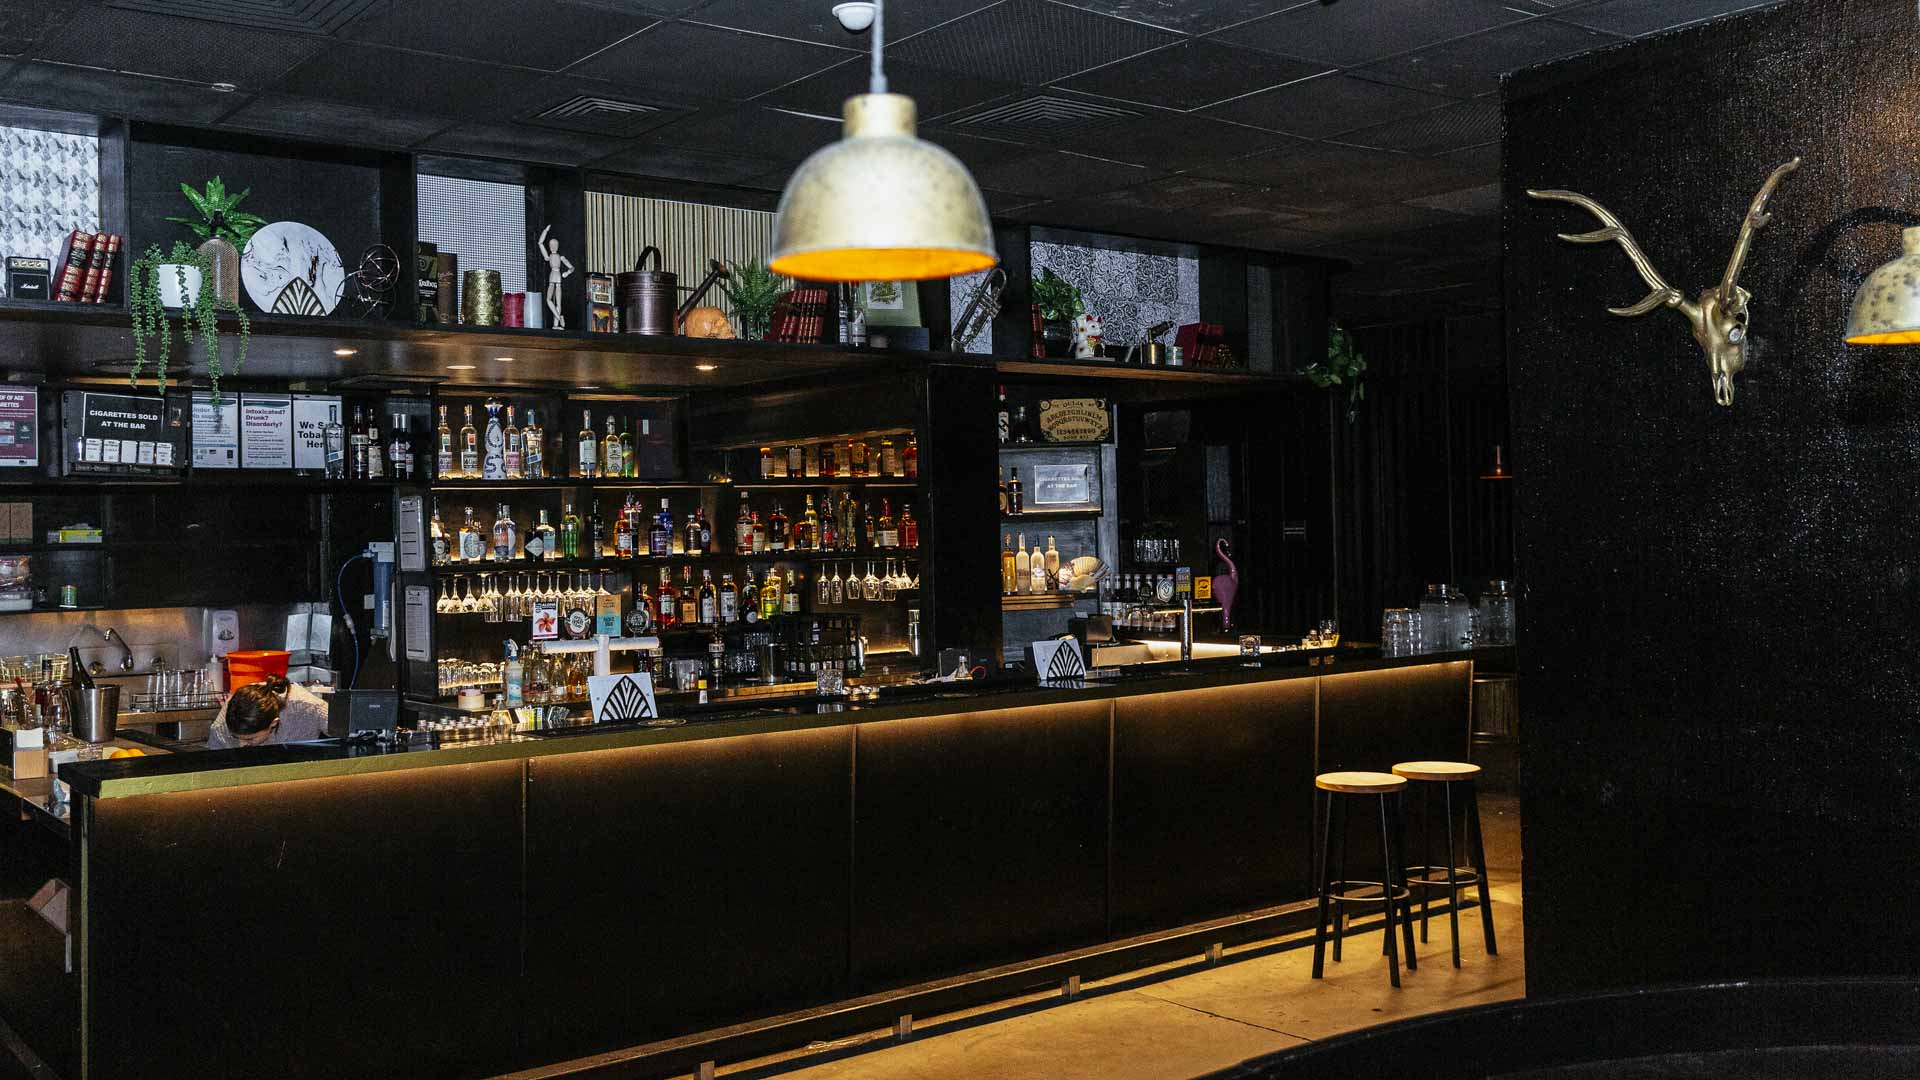 Radar Is Melbourne CBD's New Nightclub and Bar in the Former Lounge Site